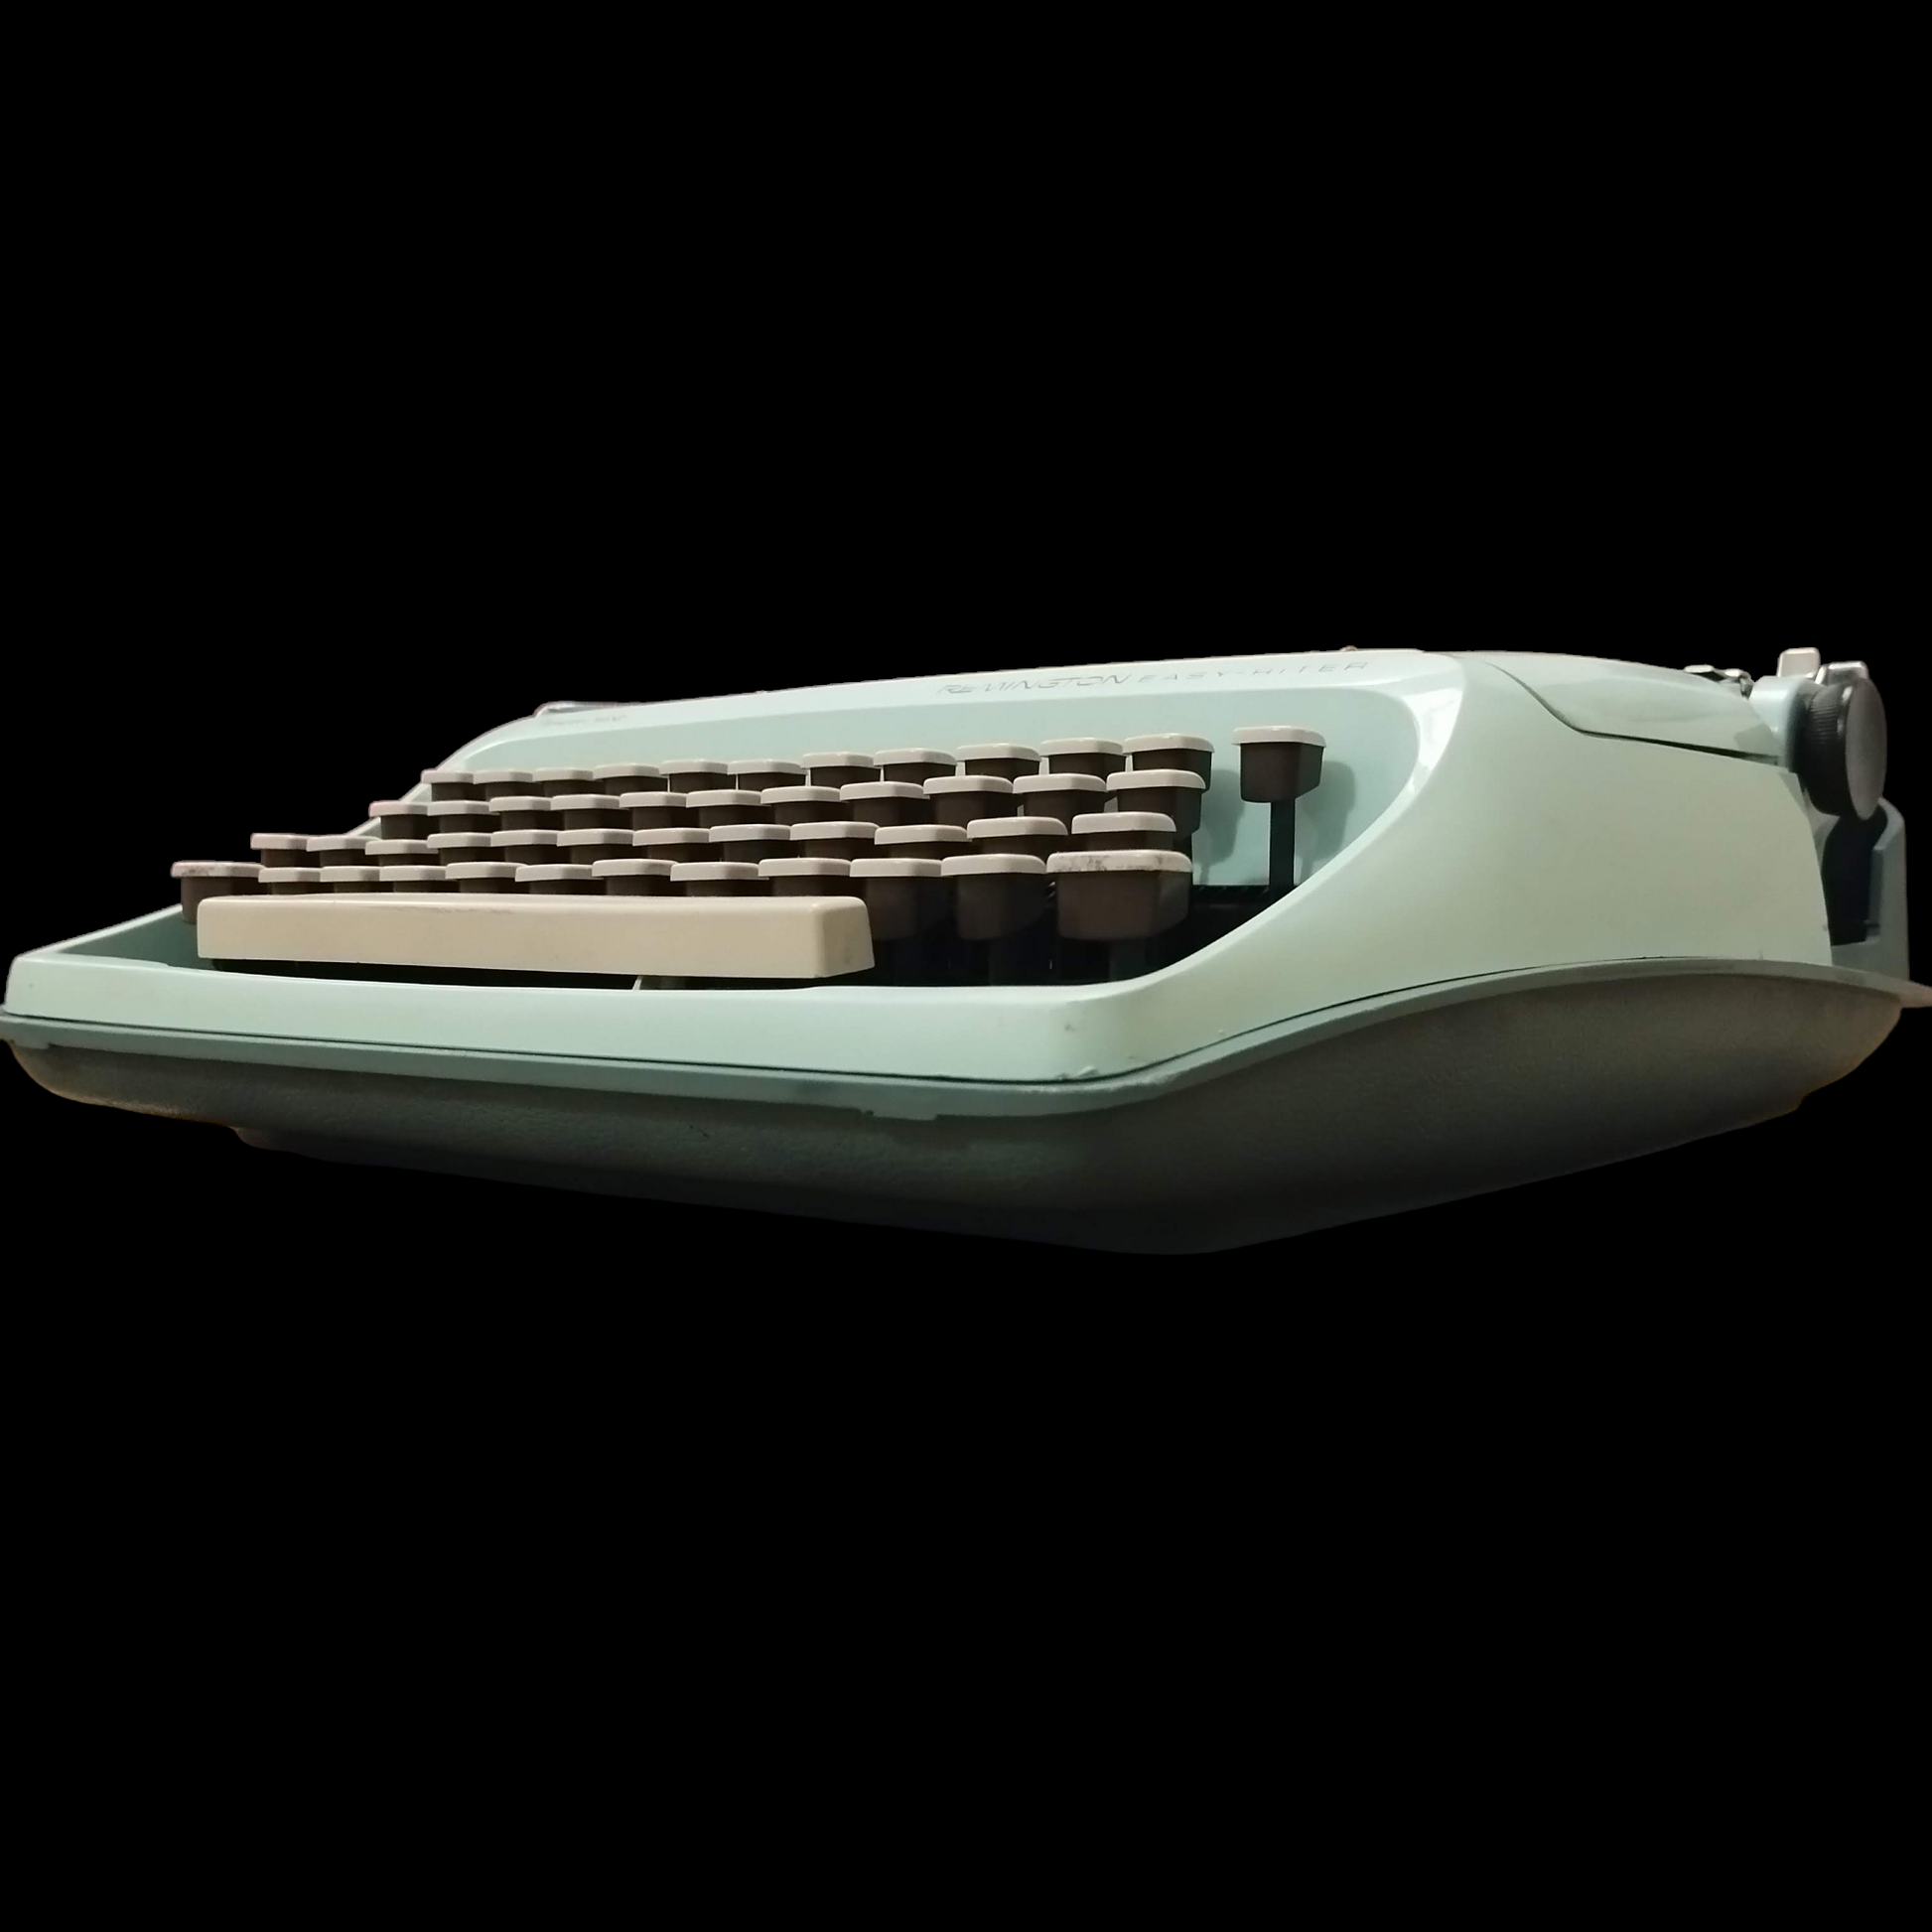 Image of Remington Easy-Riter Sperry Rand Typewriter. Available from universaltypewritercompany.in